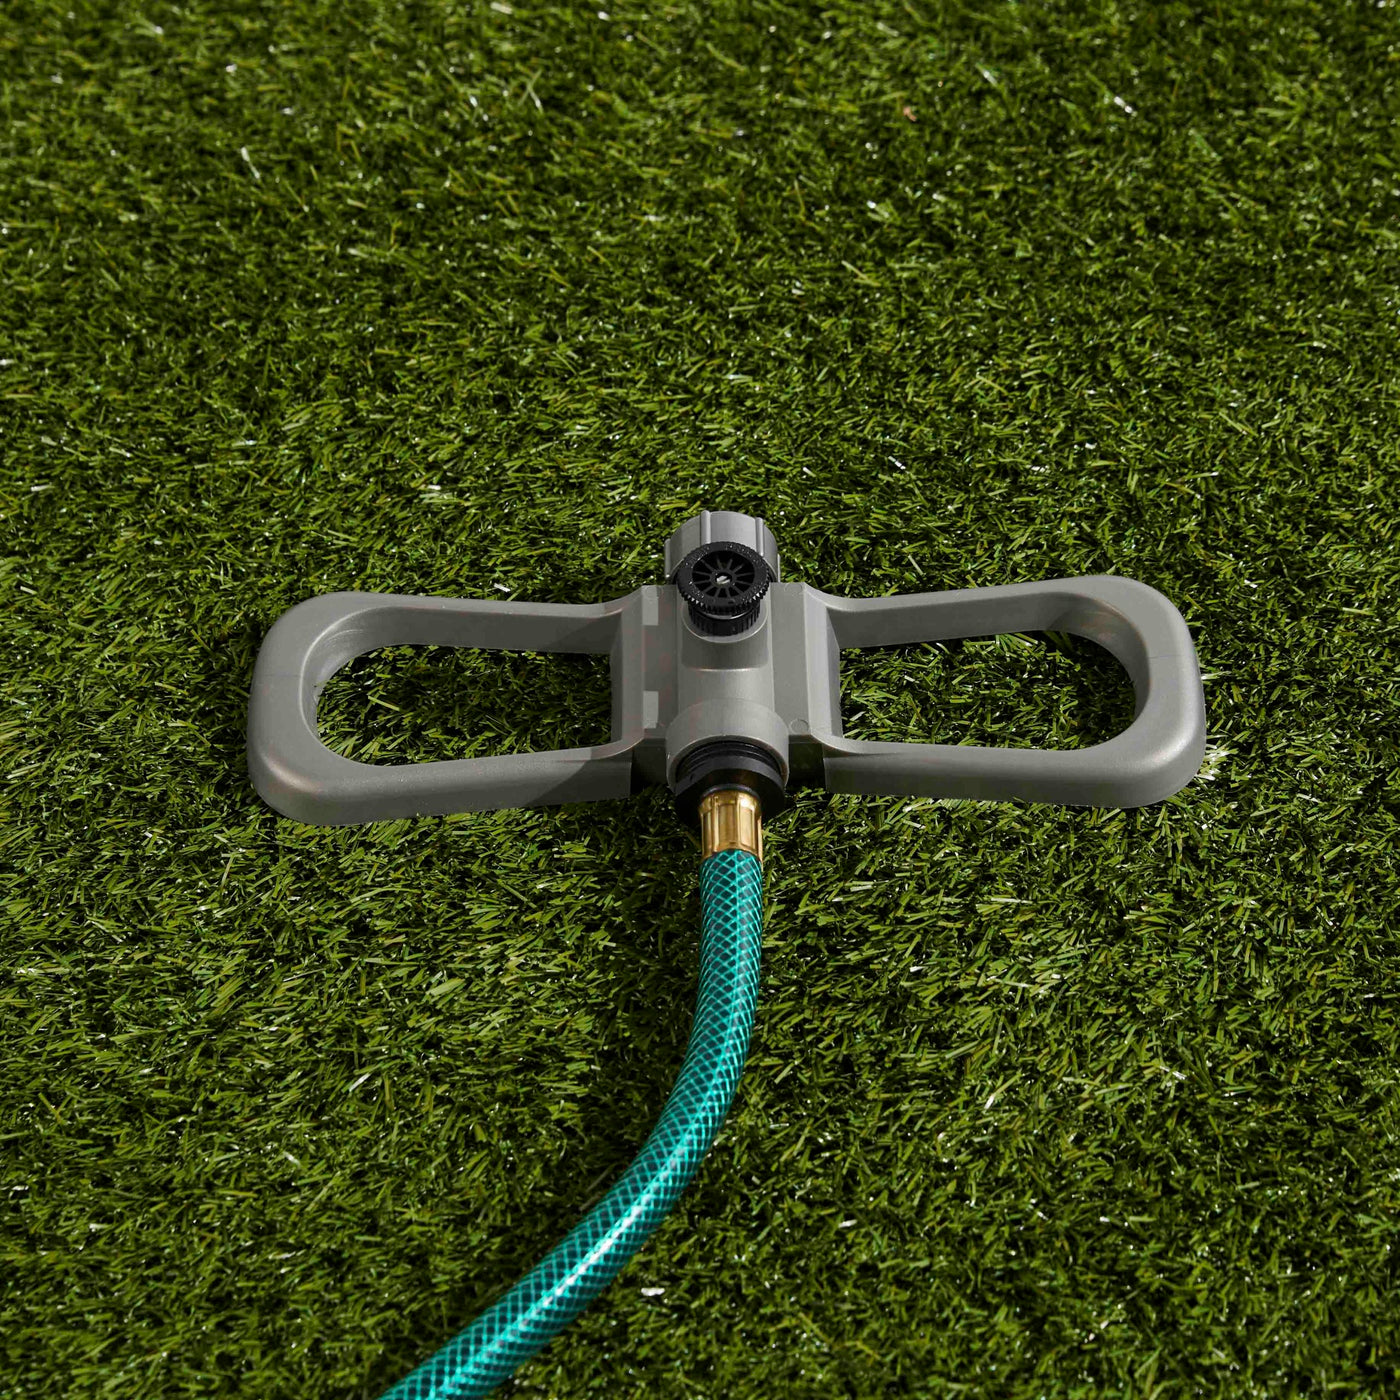 A portable sprinkler system you can customize to fit your yard.